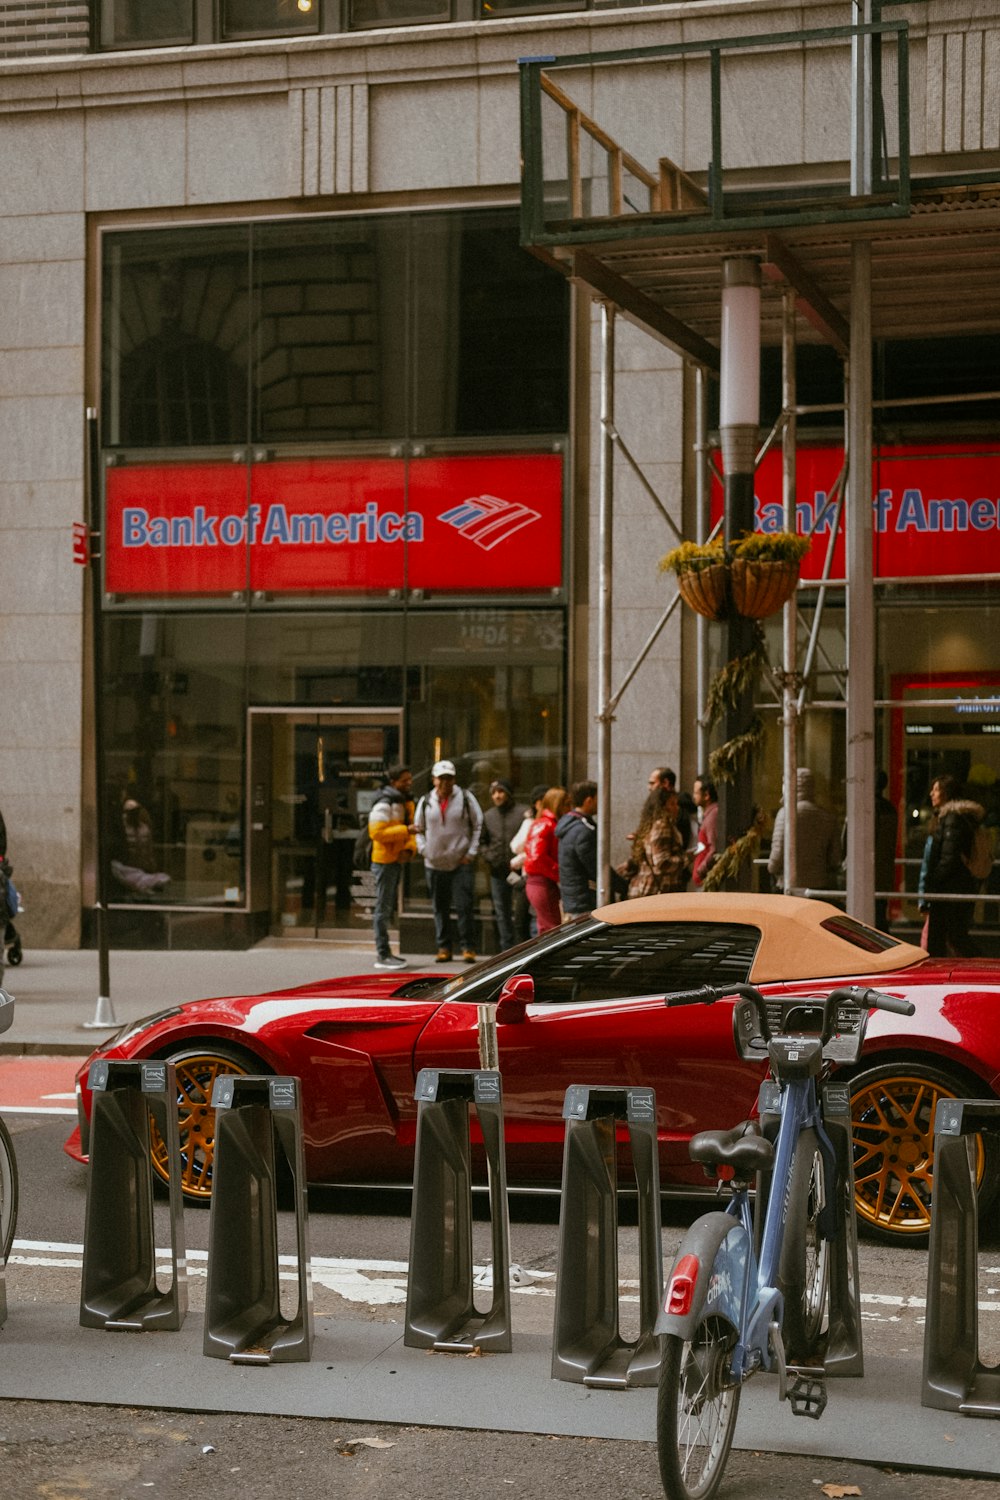 a red sports car is parked in front of a bank of america